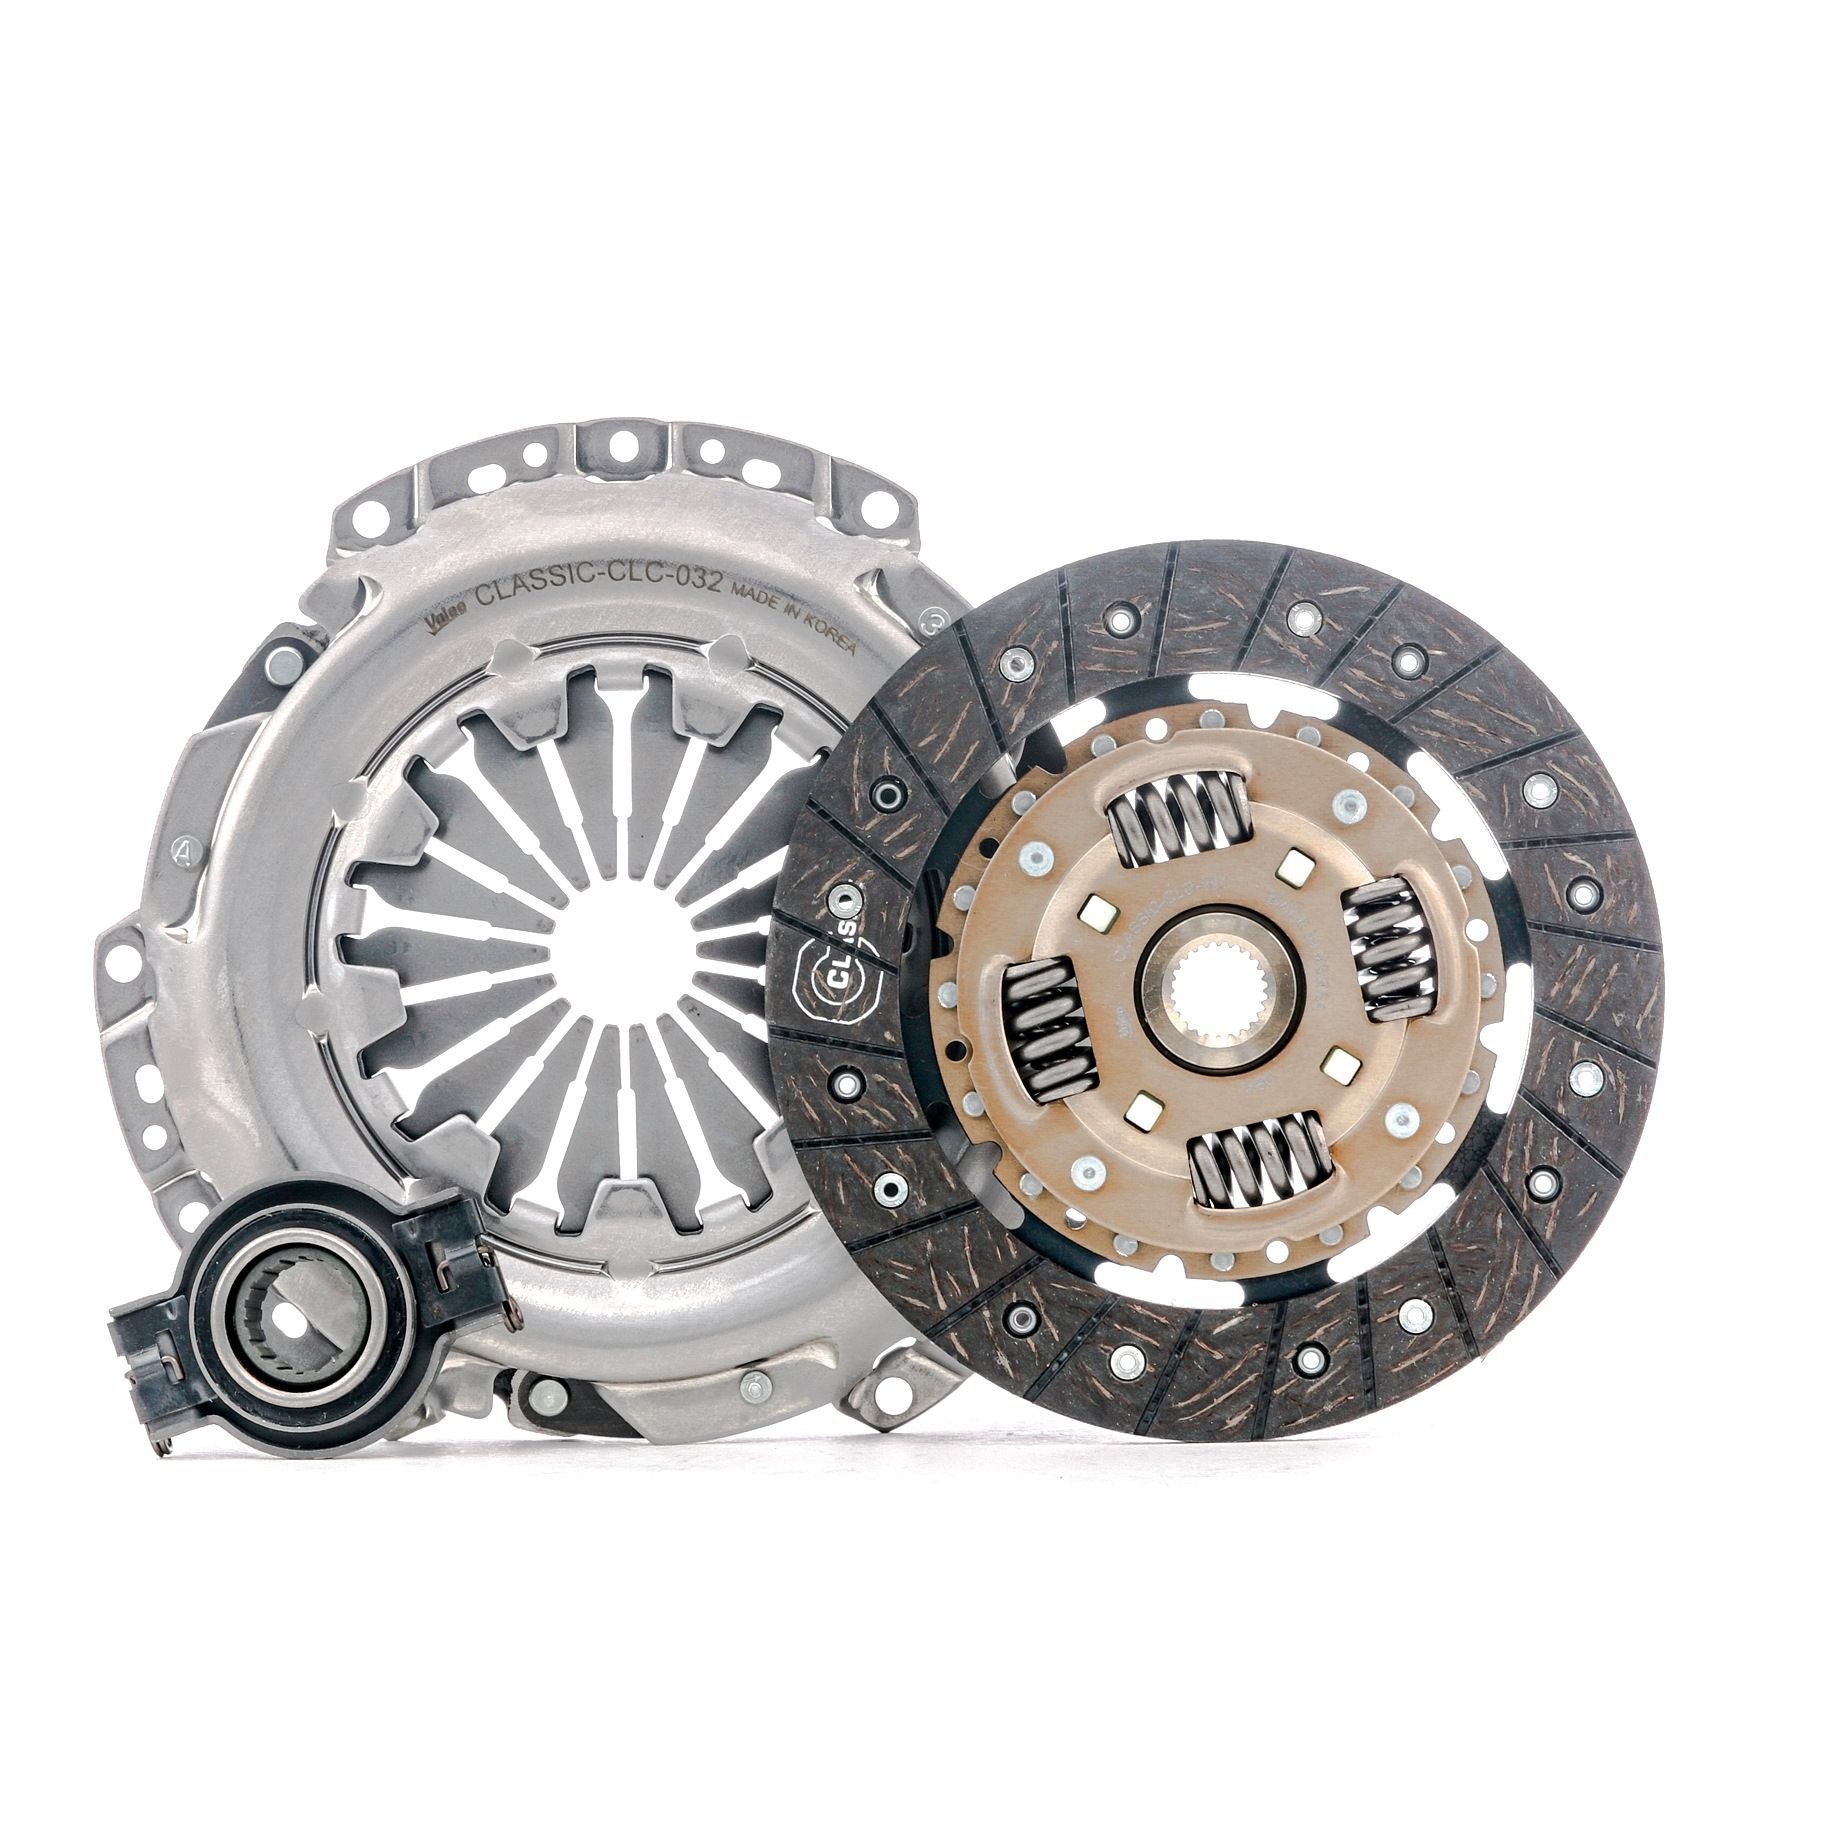 Original VALEO Clutch replacement kit 786032 for VW CADDY